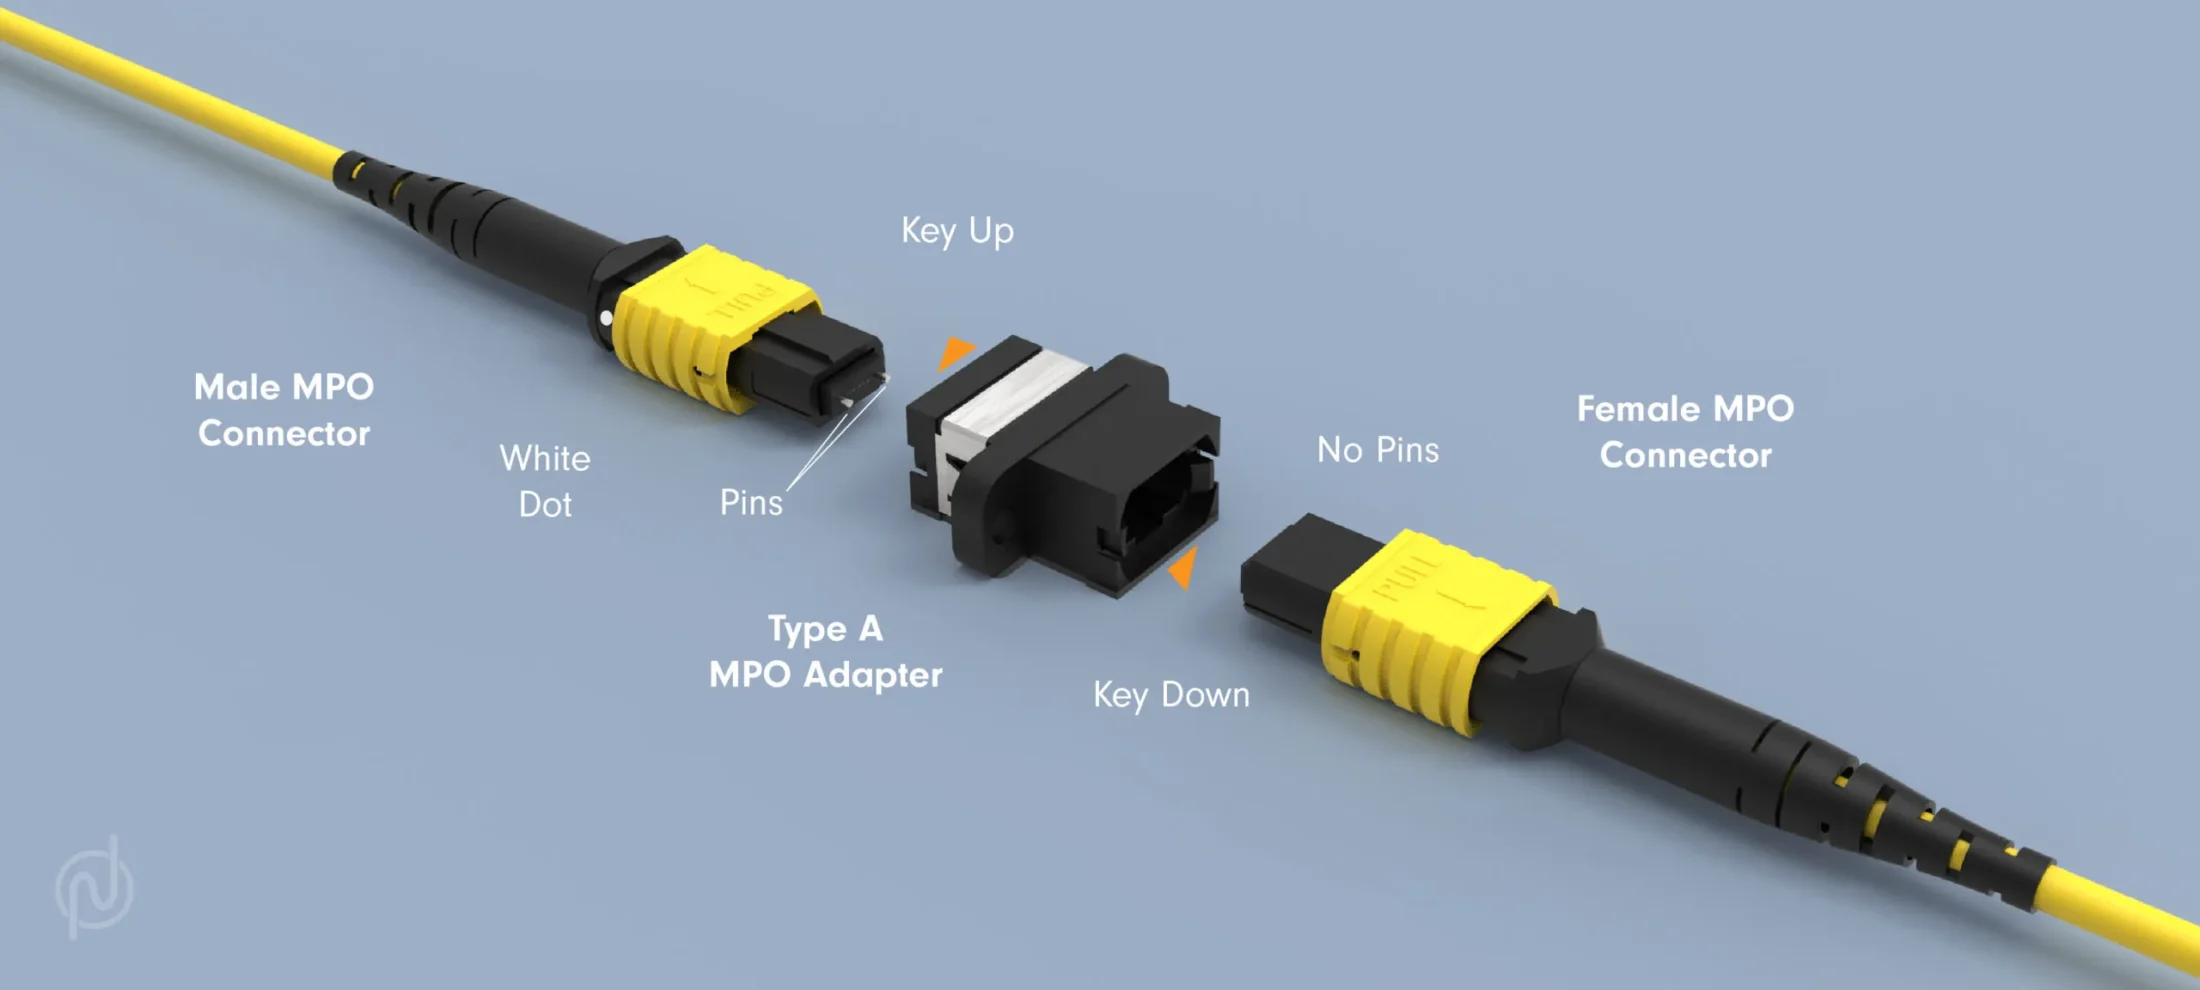 MPO connectors use different polarity methods